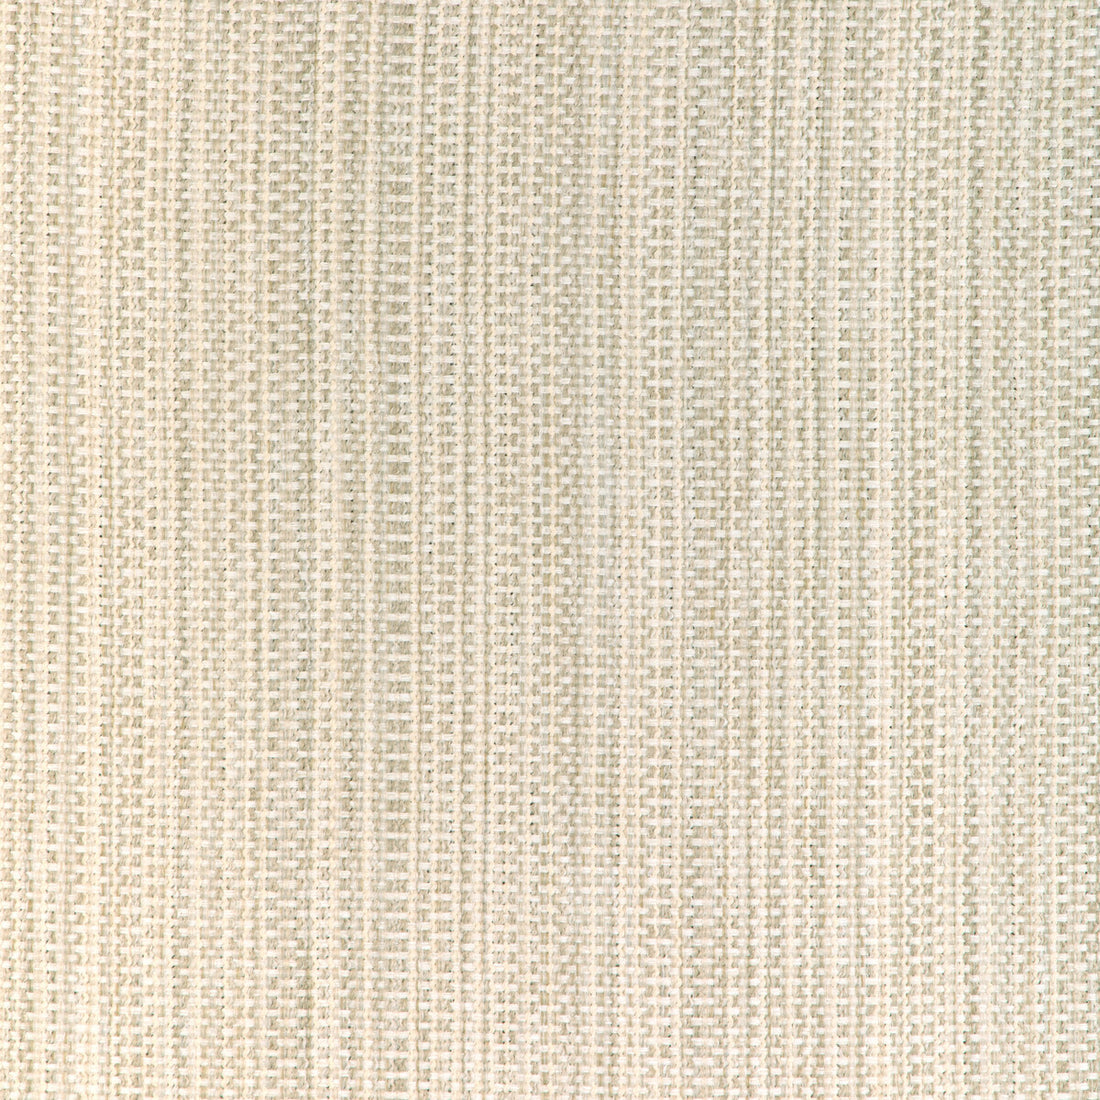 Kravet Smart fabric in 37018-1601 color - pattern 37018.1601.0 - by Kravet Smart in the Gis collection